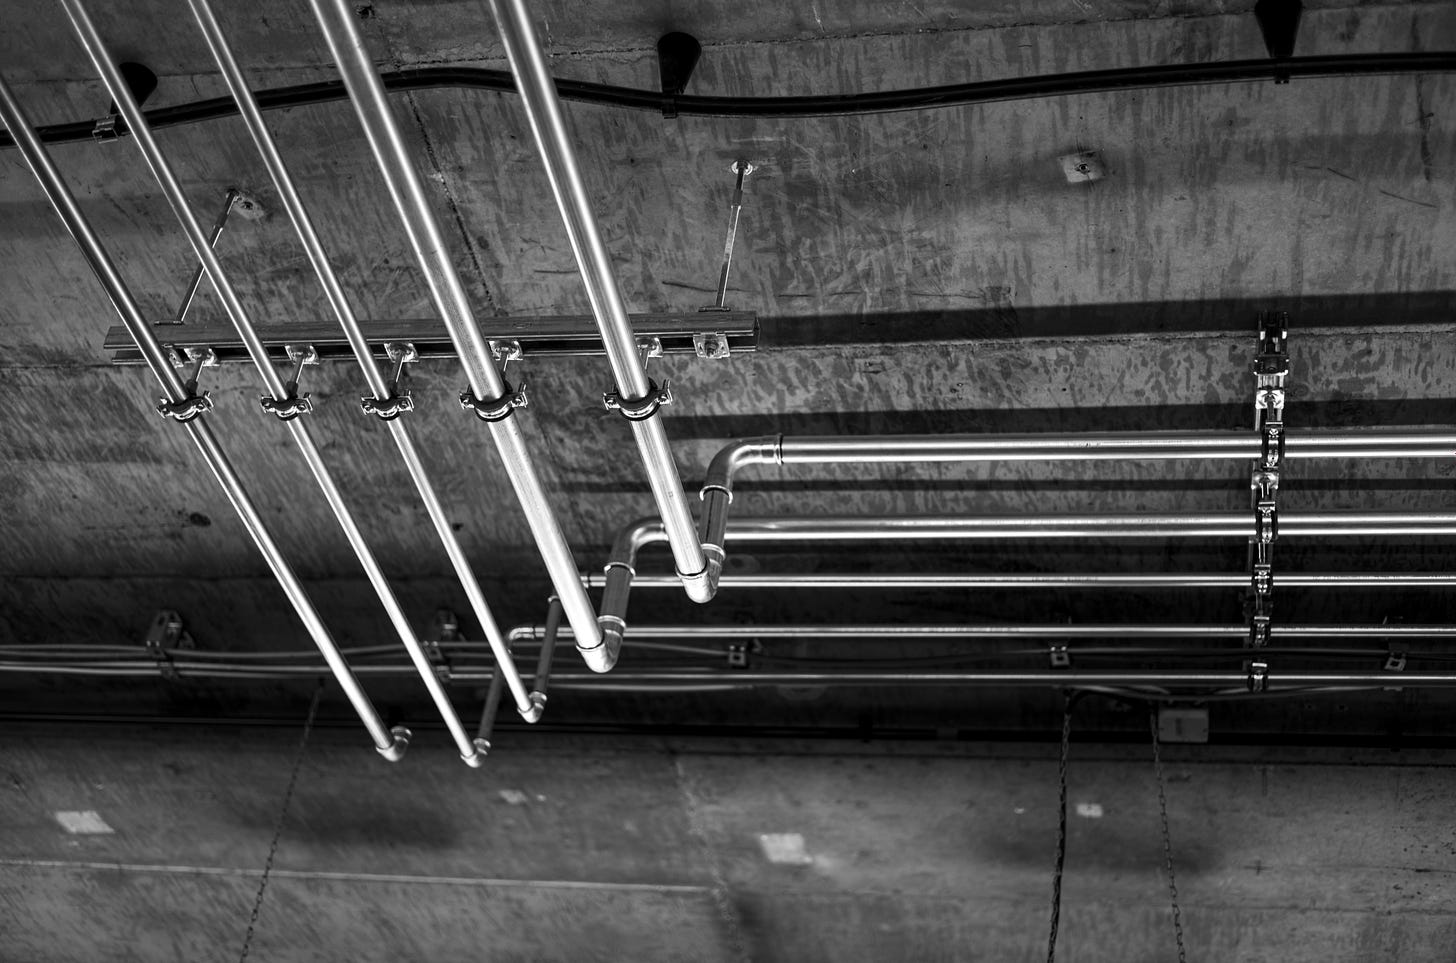 Black-and-white photo of five metal water pipes running along a ceiling. The pipes each turn and curve in an elbow, changing from running left/right to running up/down